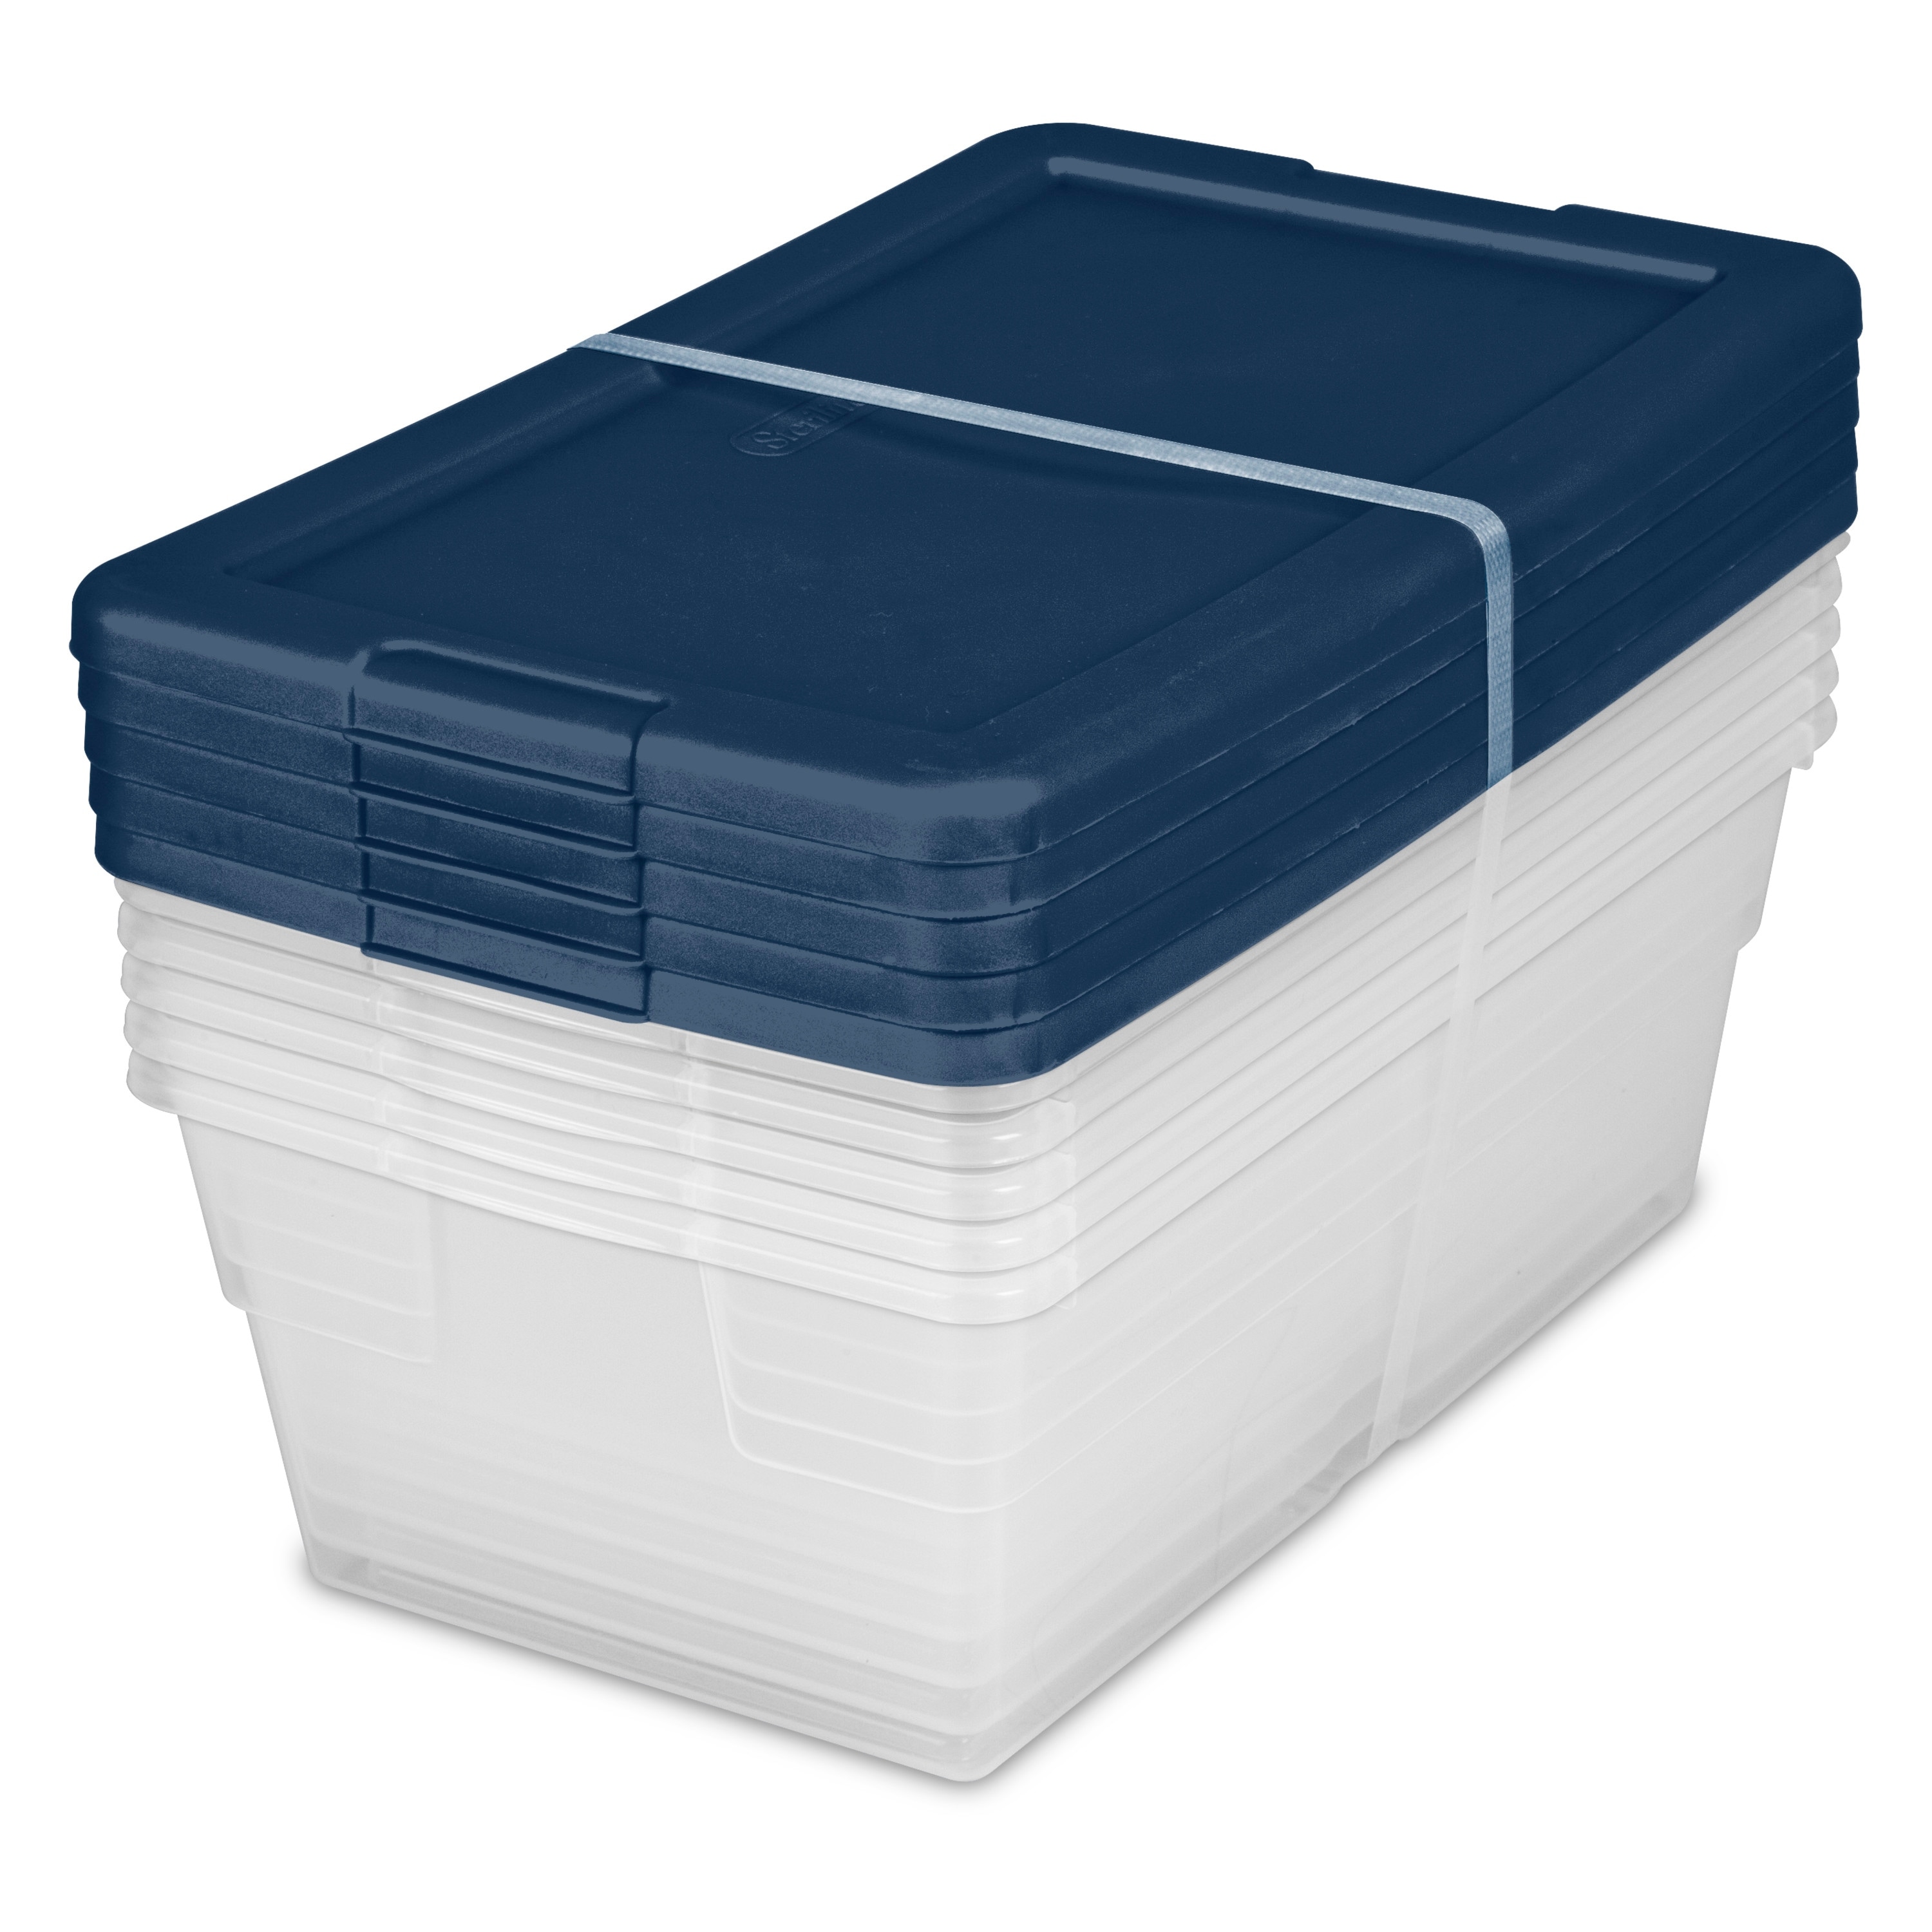 https://ak1.ostkcdn.com/images/products/is/images/direct/da307eb778fb31f3621a63132767ee72744e4ce7/Sterilite-Stackable-6-Qt-Storage-Box-Container%2C-Clear%2C-Marine-Blue-Lid-%2830-Pack%29.jpg